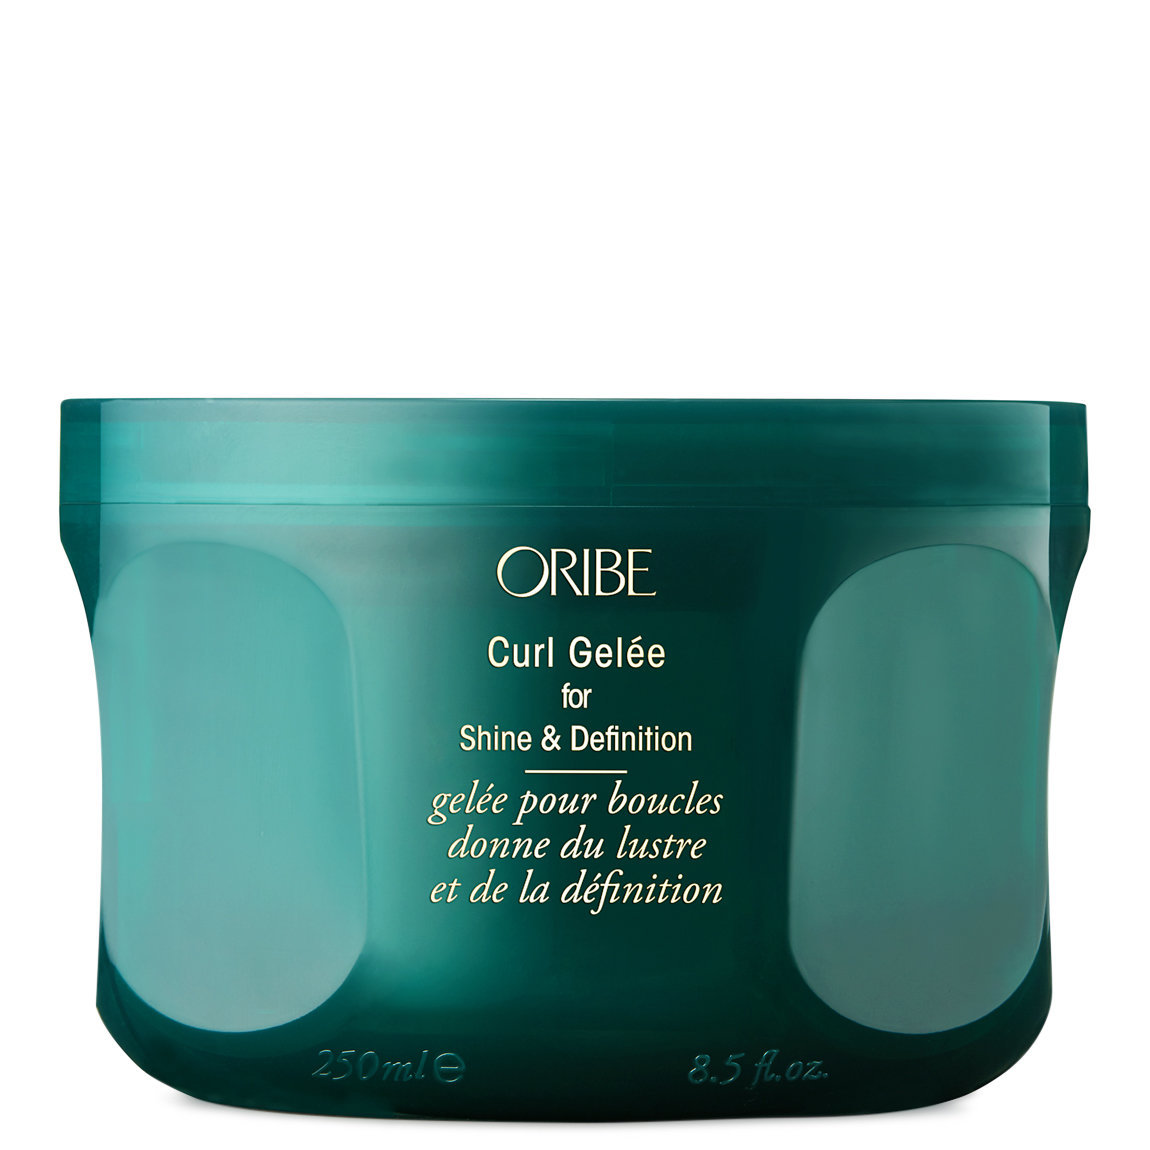 Oribe Curl Gelèe for Shine & Definition alternative view 1 - product swatch.